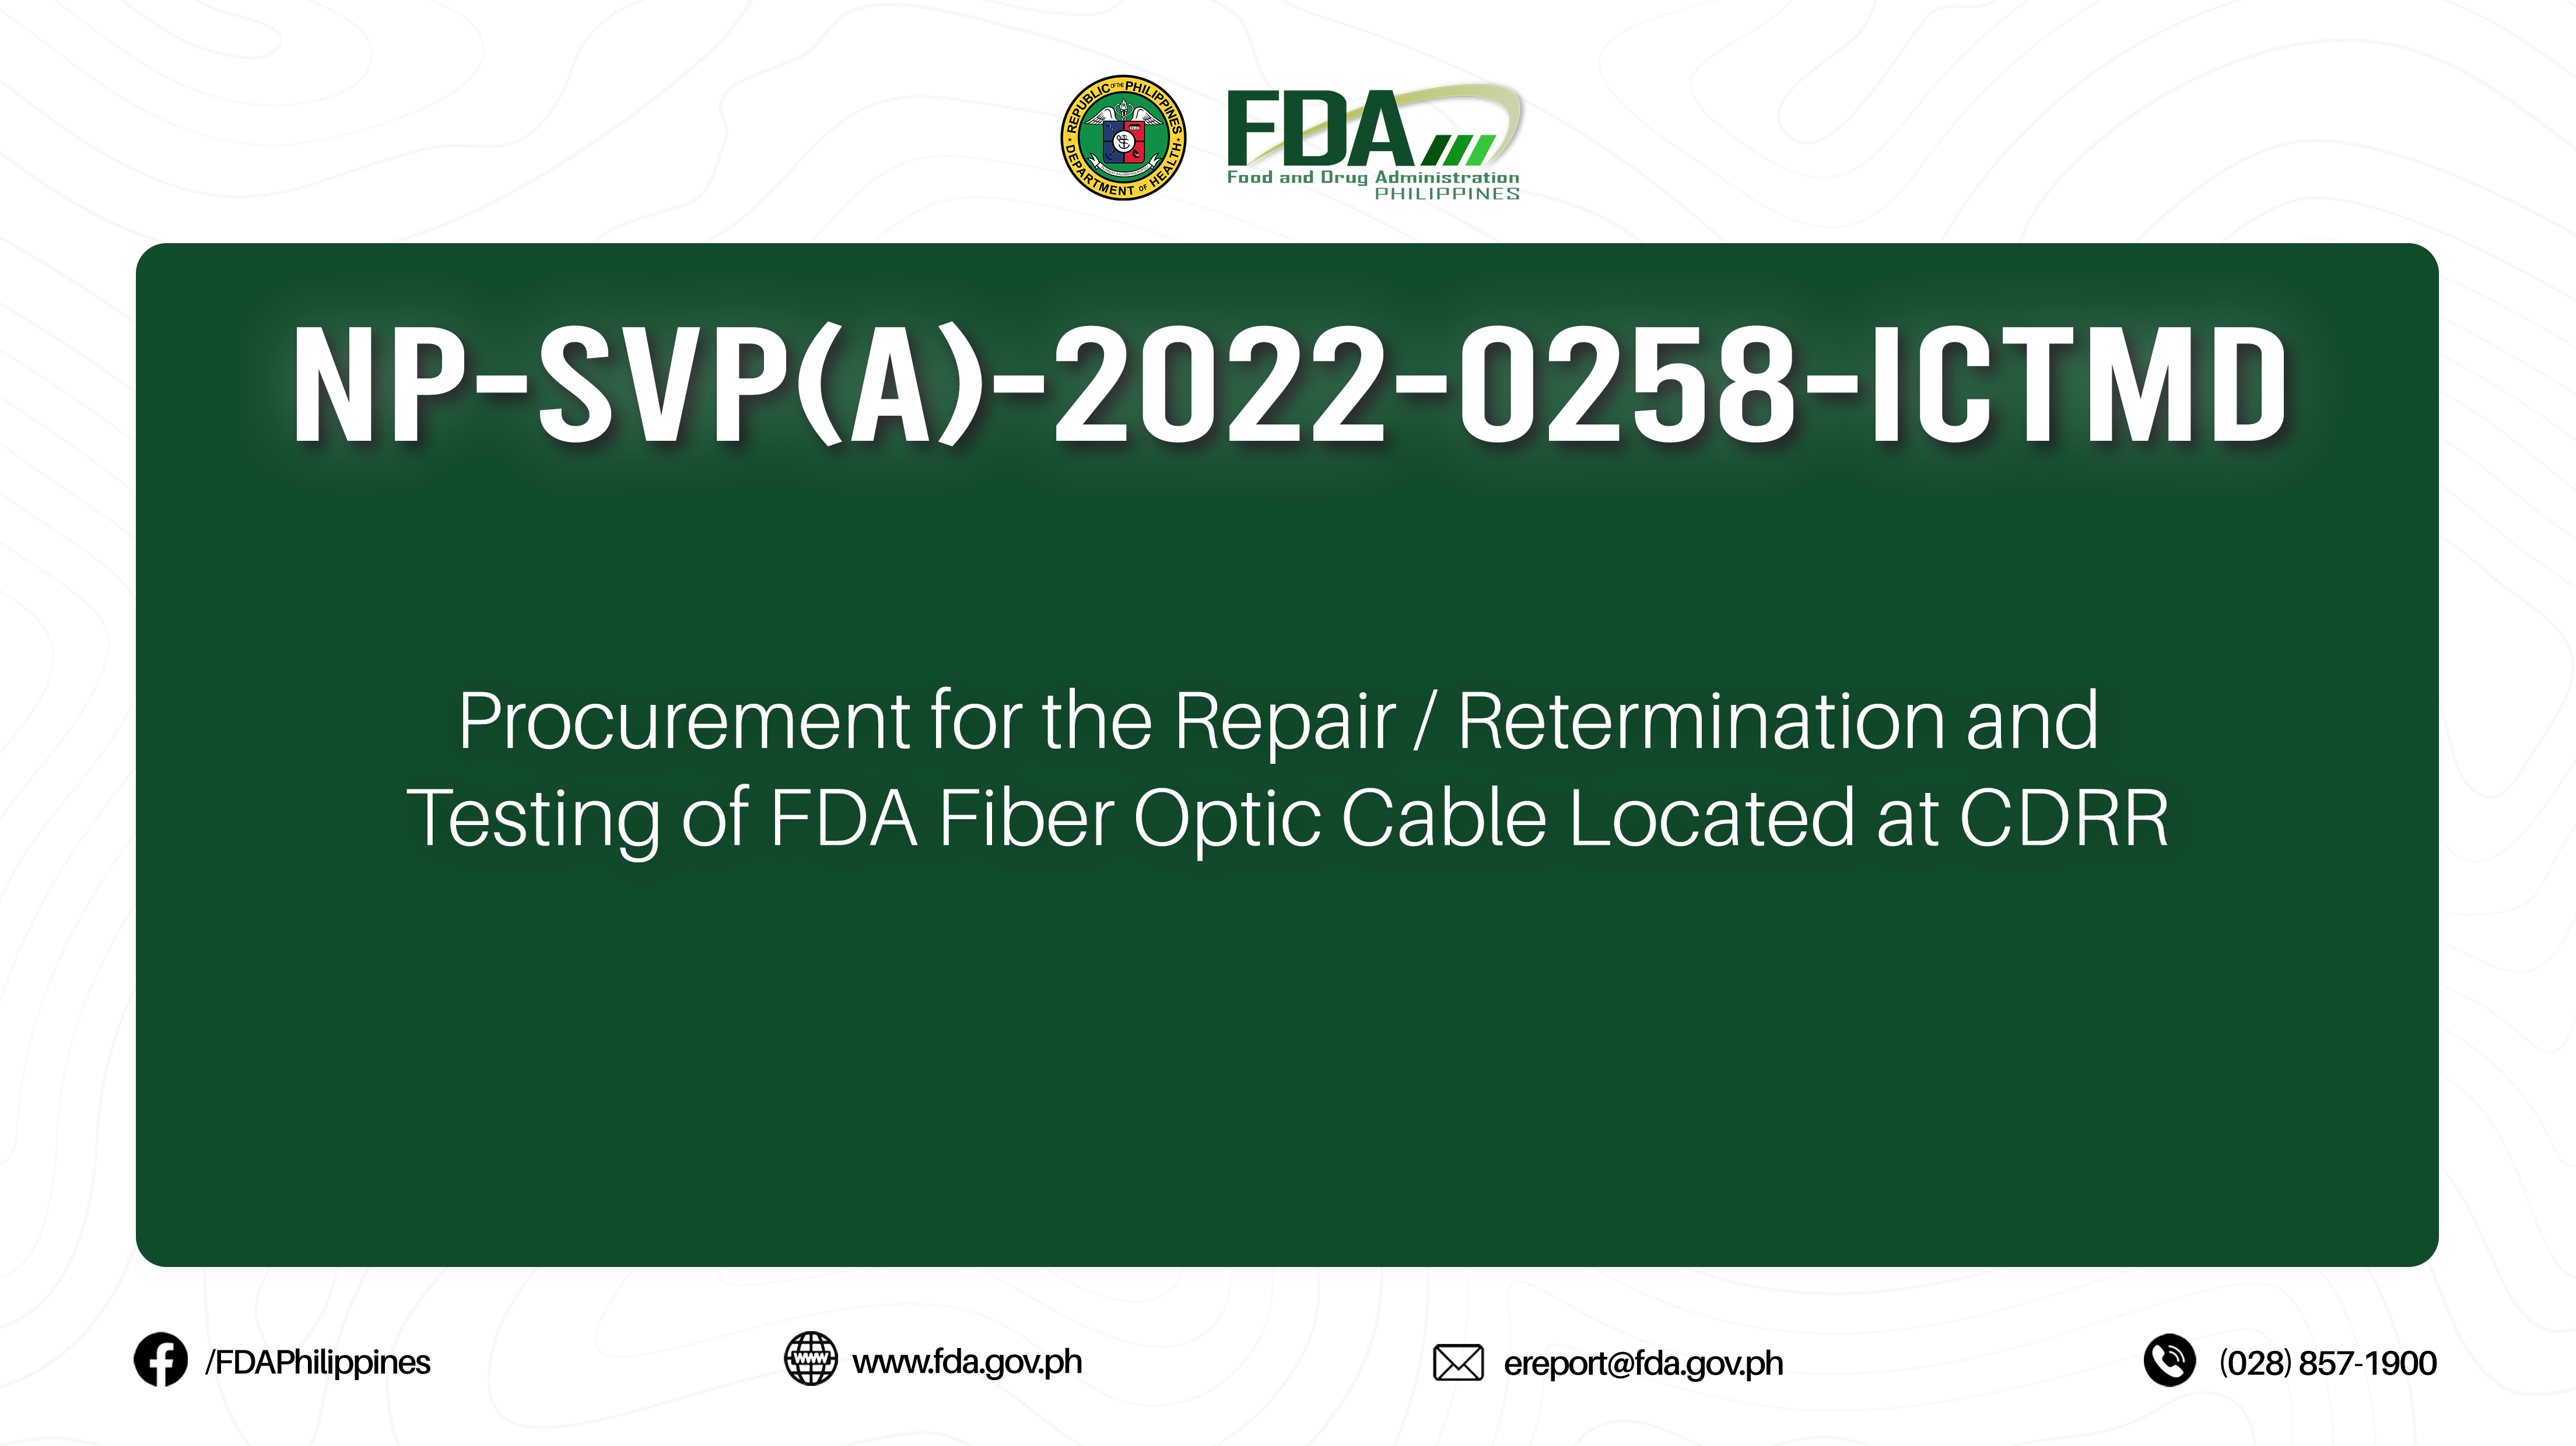 NP-SVP(A)-2022-0258-ICTMD || Procurement for the Repair / Retermination and Testing of FDA Fiber Optic Cable Located at CDRR